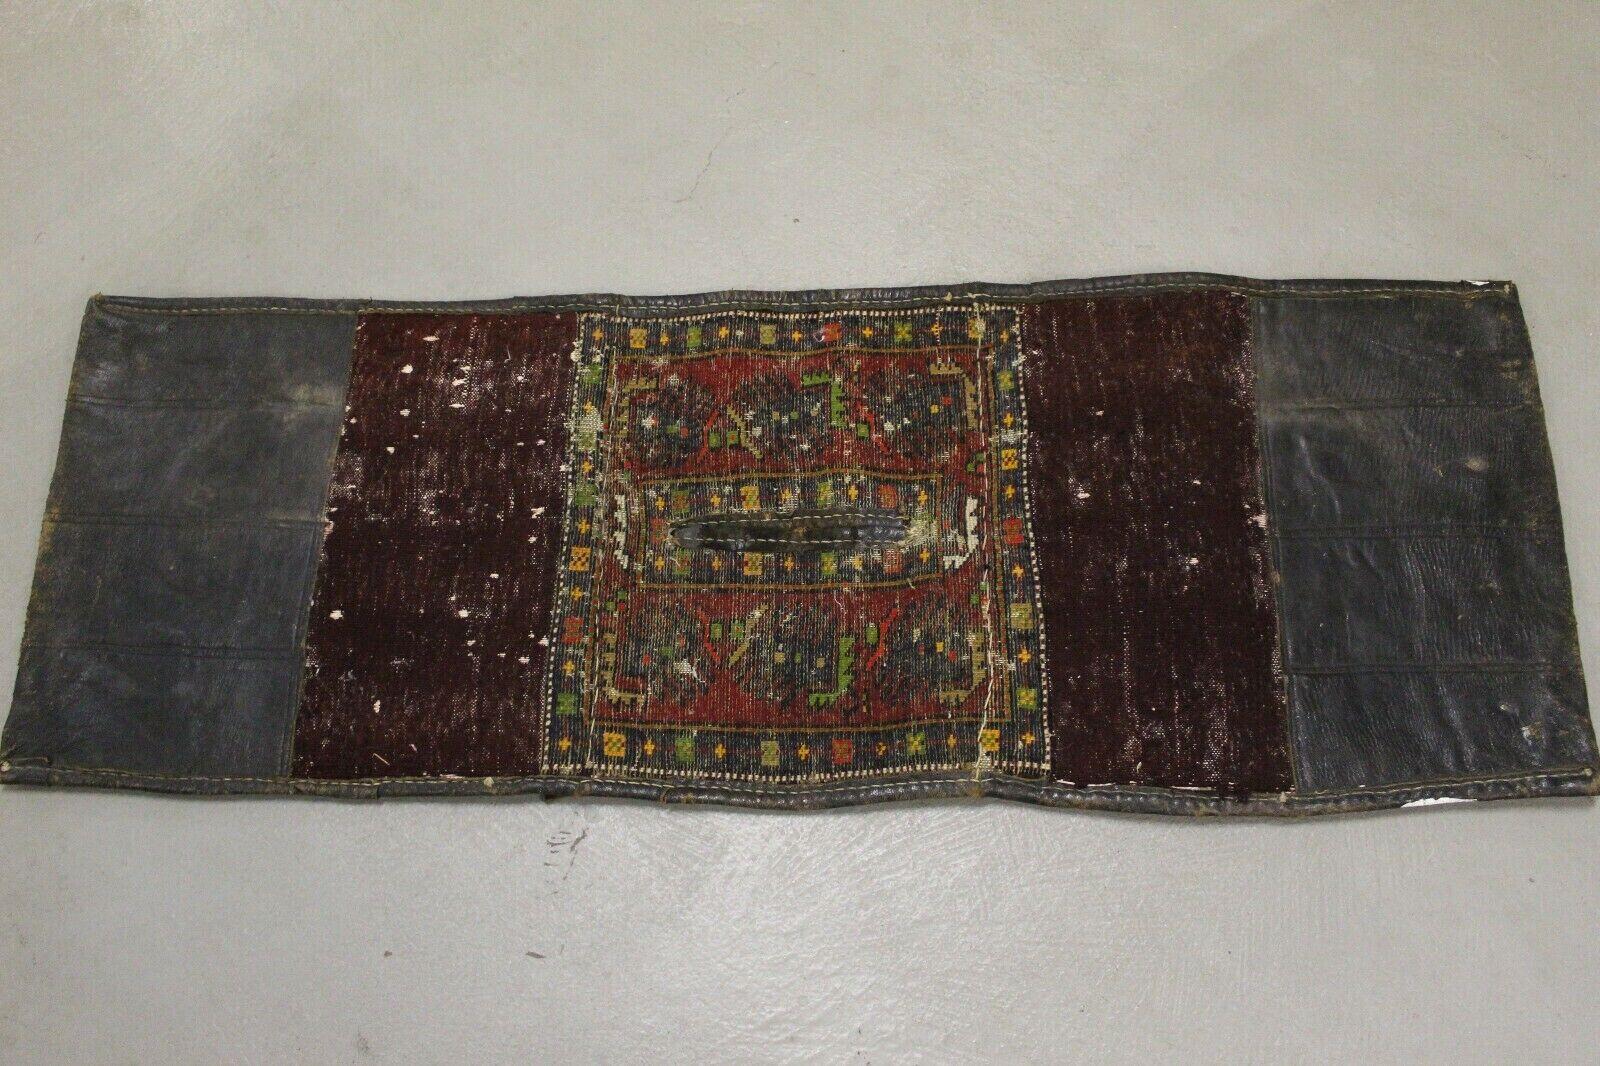 Mid-20th Century Handmade Vintage Persian Style Malayer Saddle Bag 1.4' x 4.2', 1960s - 1K16 For Sale